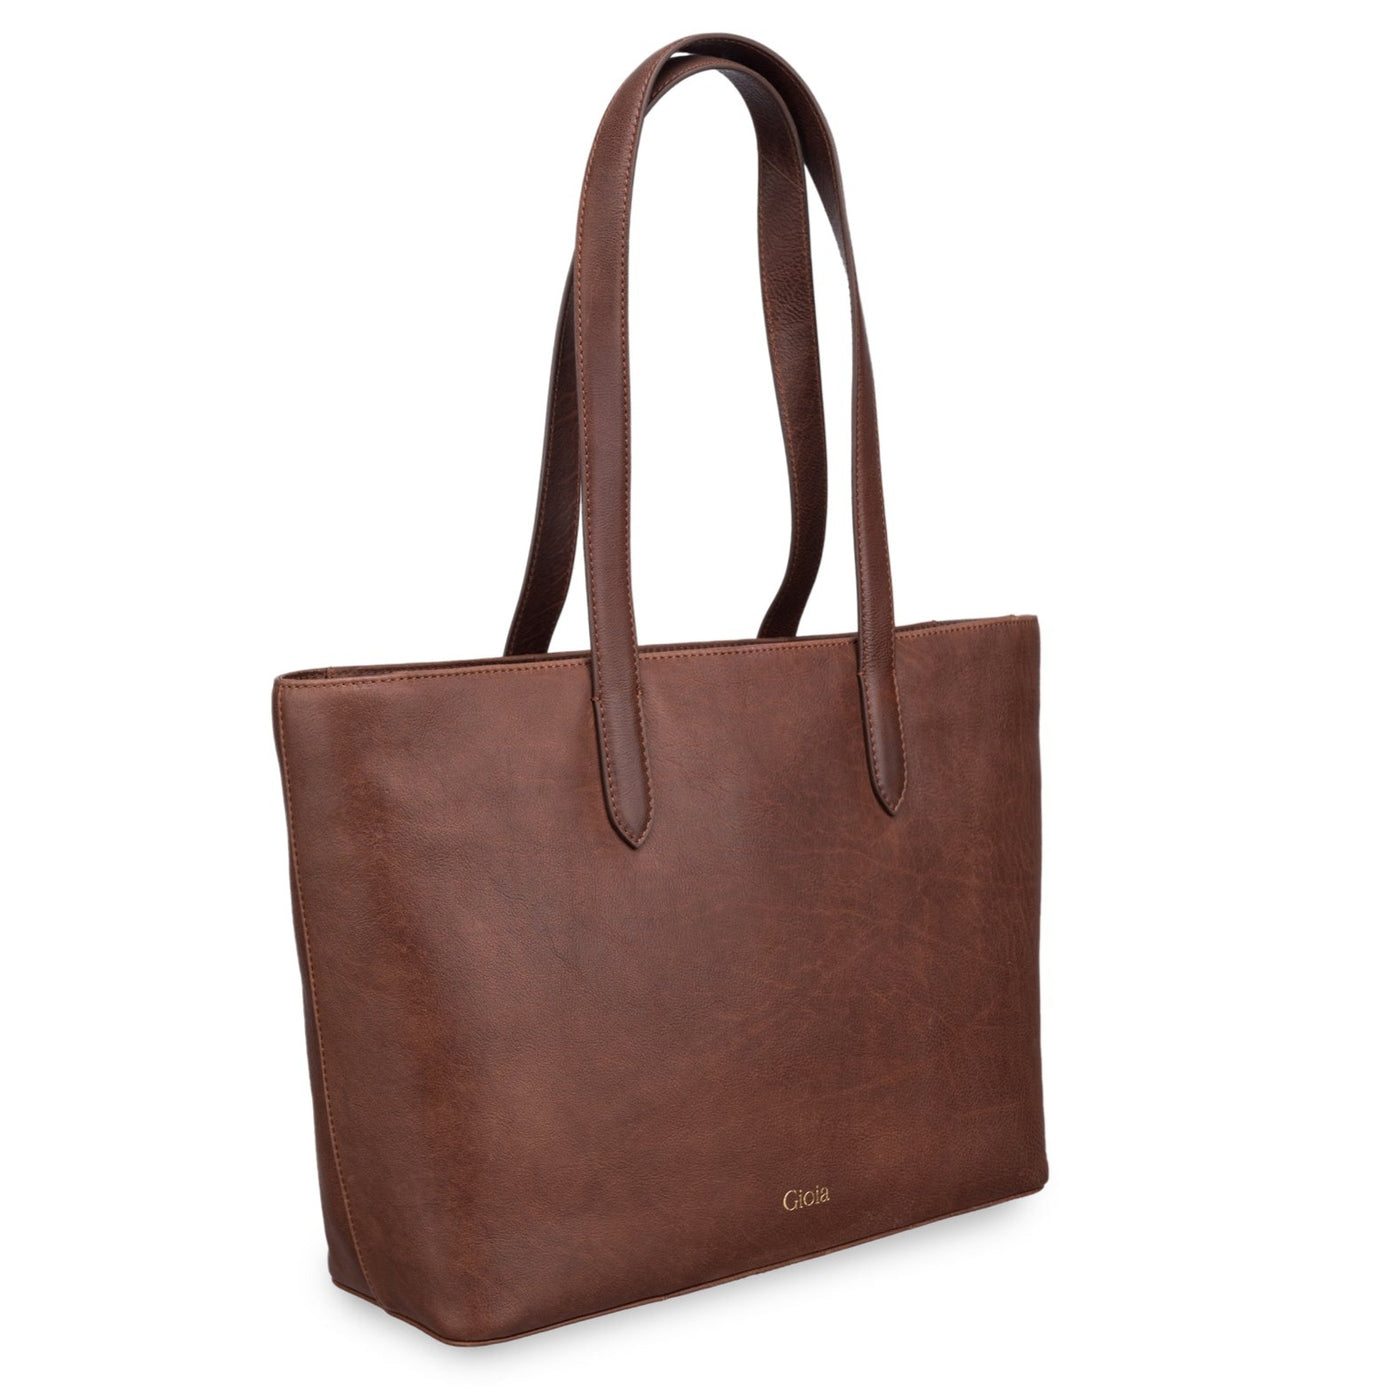 Grace top zip leather tote